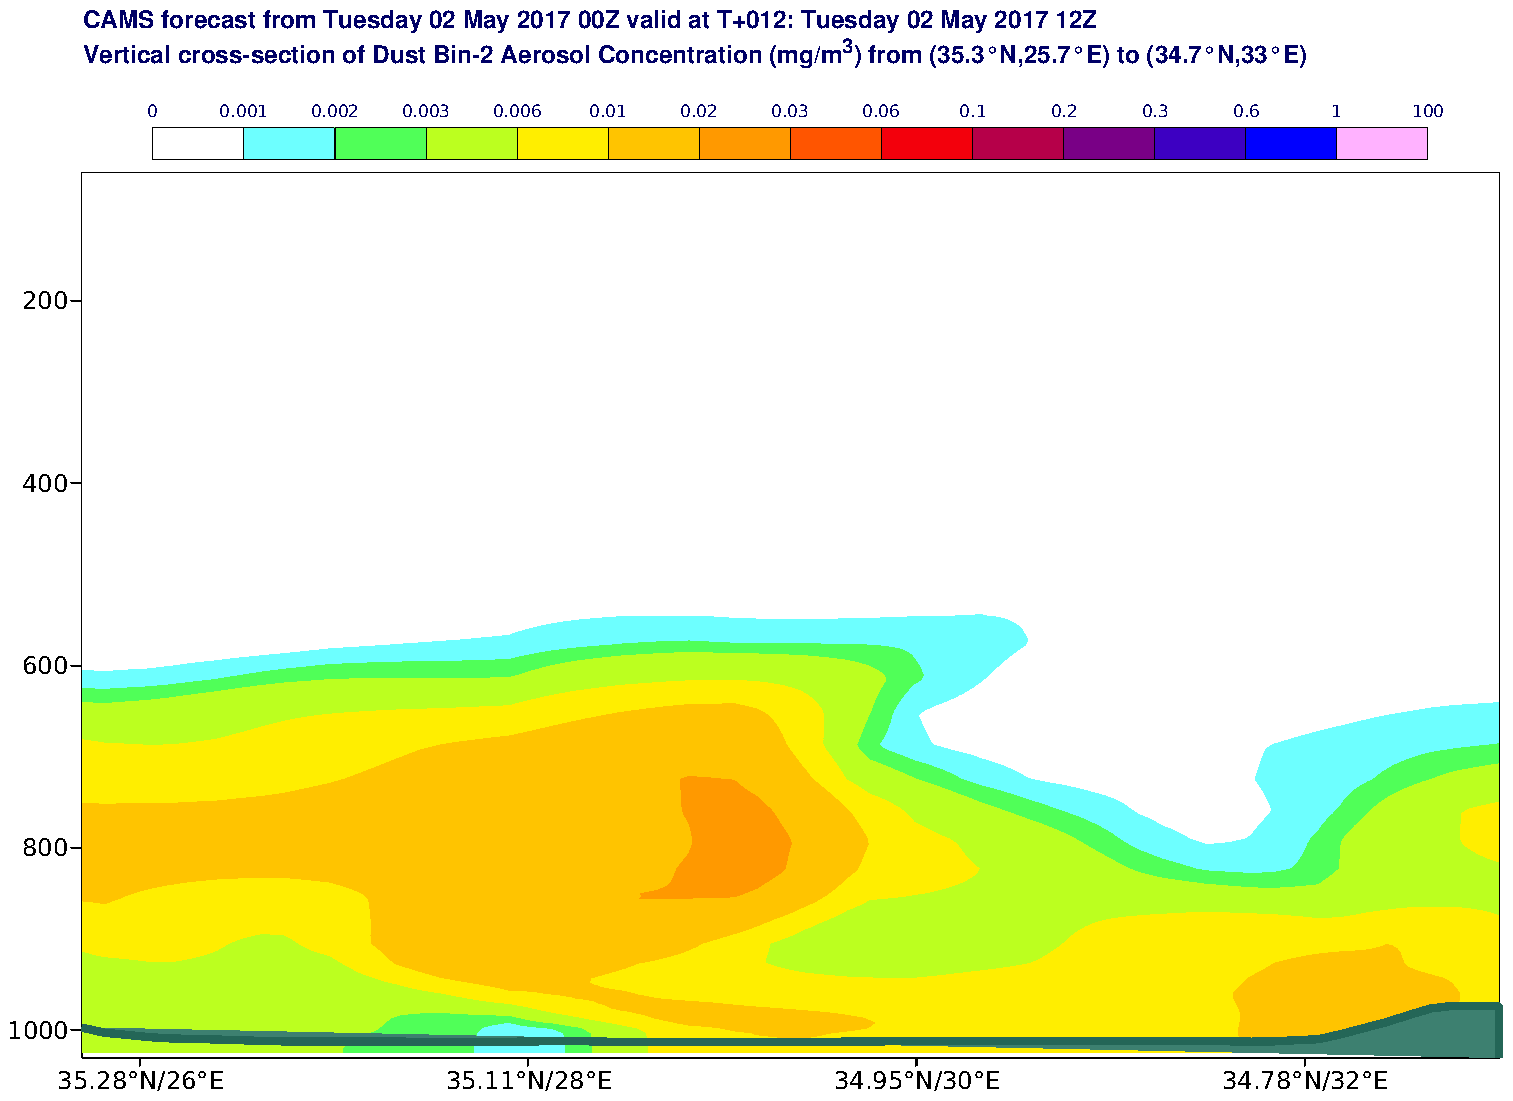 Vertical cross-section of Dust Bin-2 Aerosol Concentration (mg/m3) valid at T12 - 2017-05-02 12:00